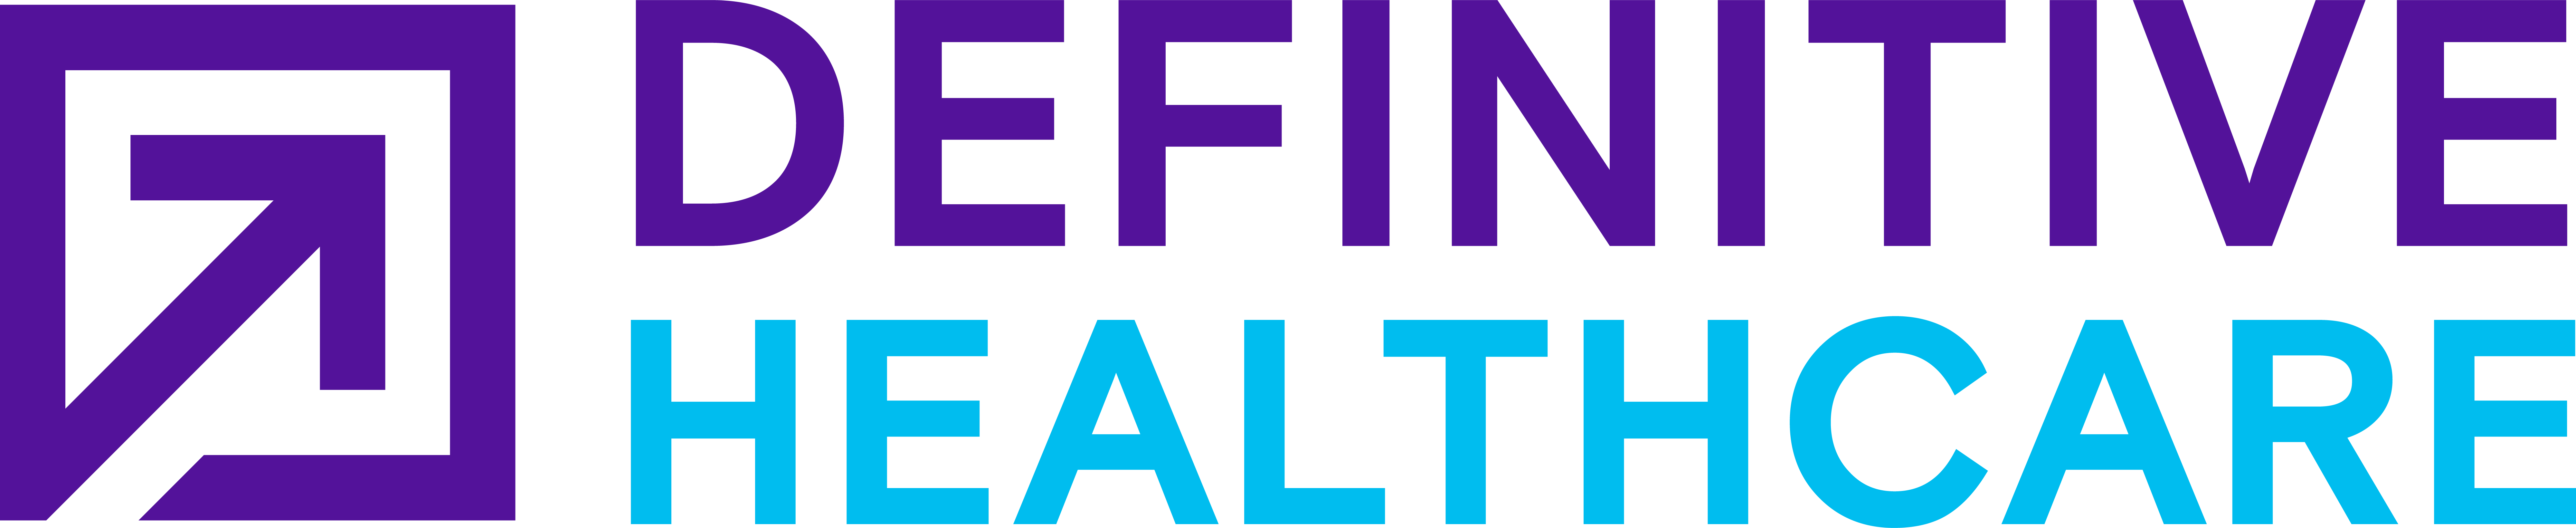 Definitive Healthcare to Present at the Morgan Stanley 21st Annual Global Healthcare Conference